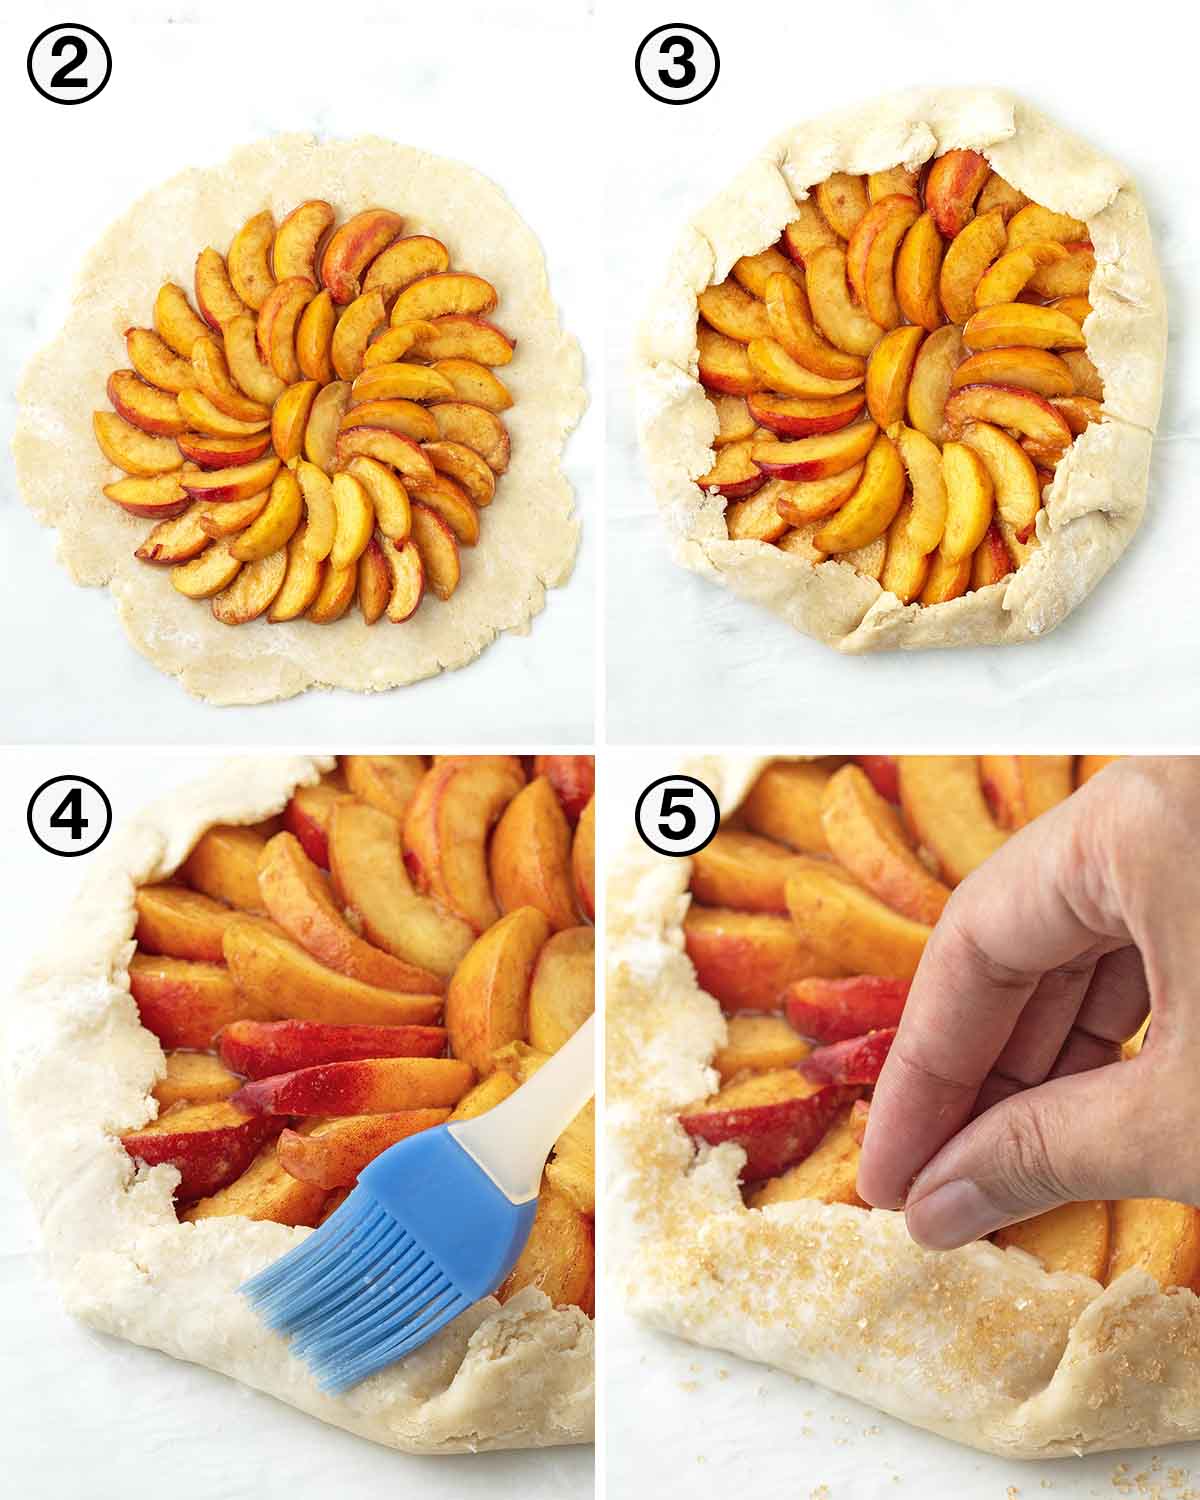 A collage of four images showing the third sequence of steps needed to make a vegan peach galette.